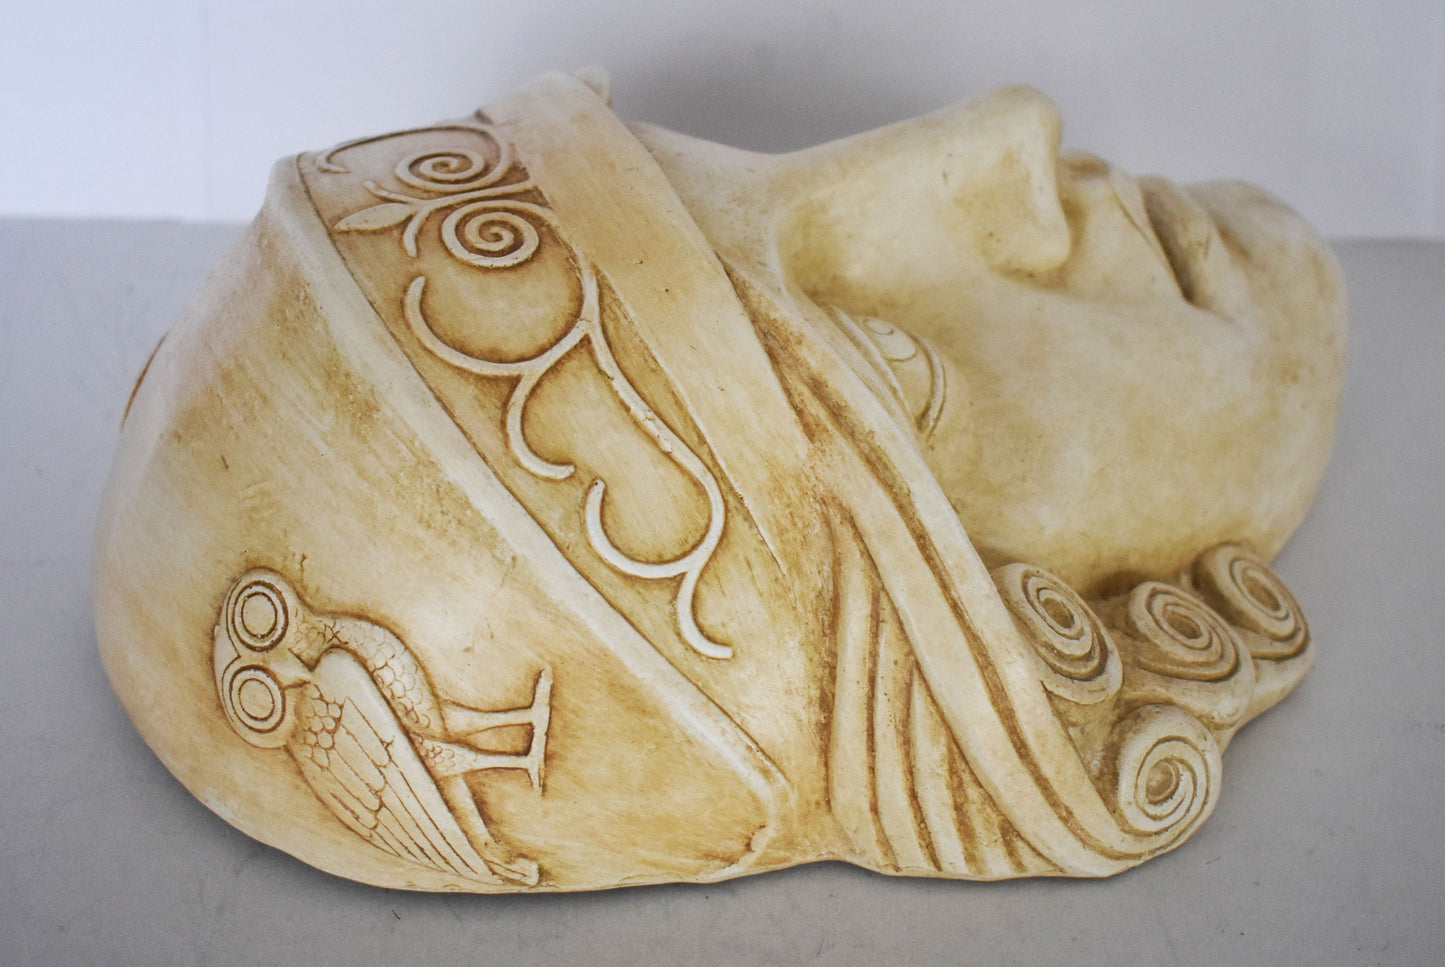 Athena Mask - Greek Goddes of Wisdom, Strength, Strategy, Courage, Inspiration, Arts, Crafts, and Skill- Wall Decoration